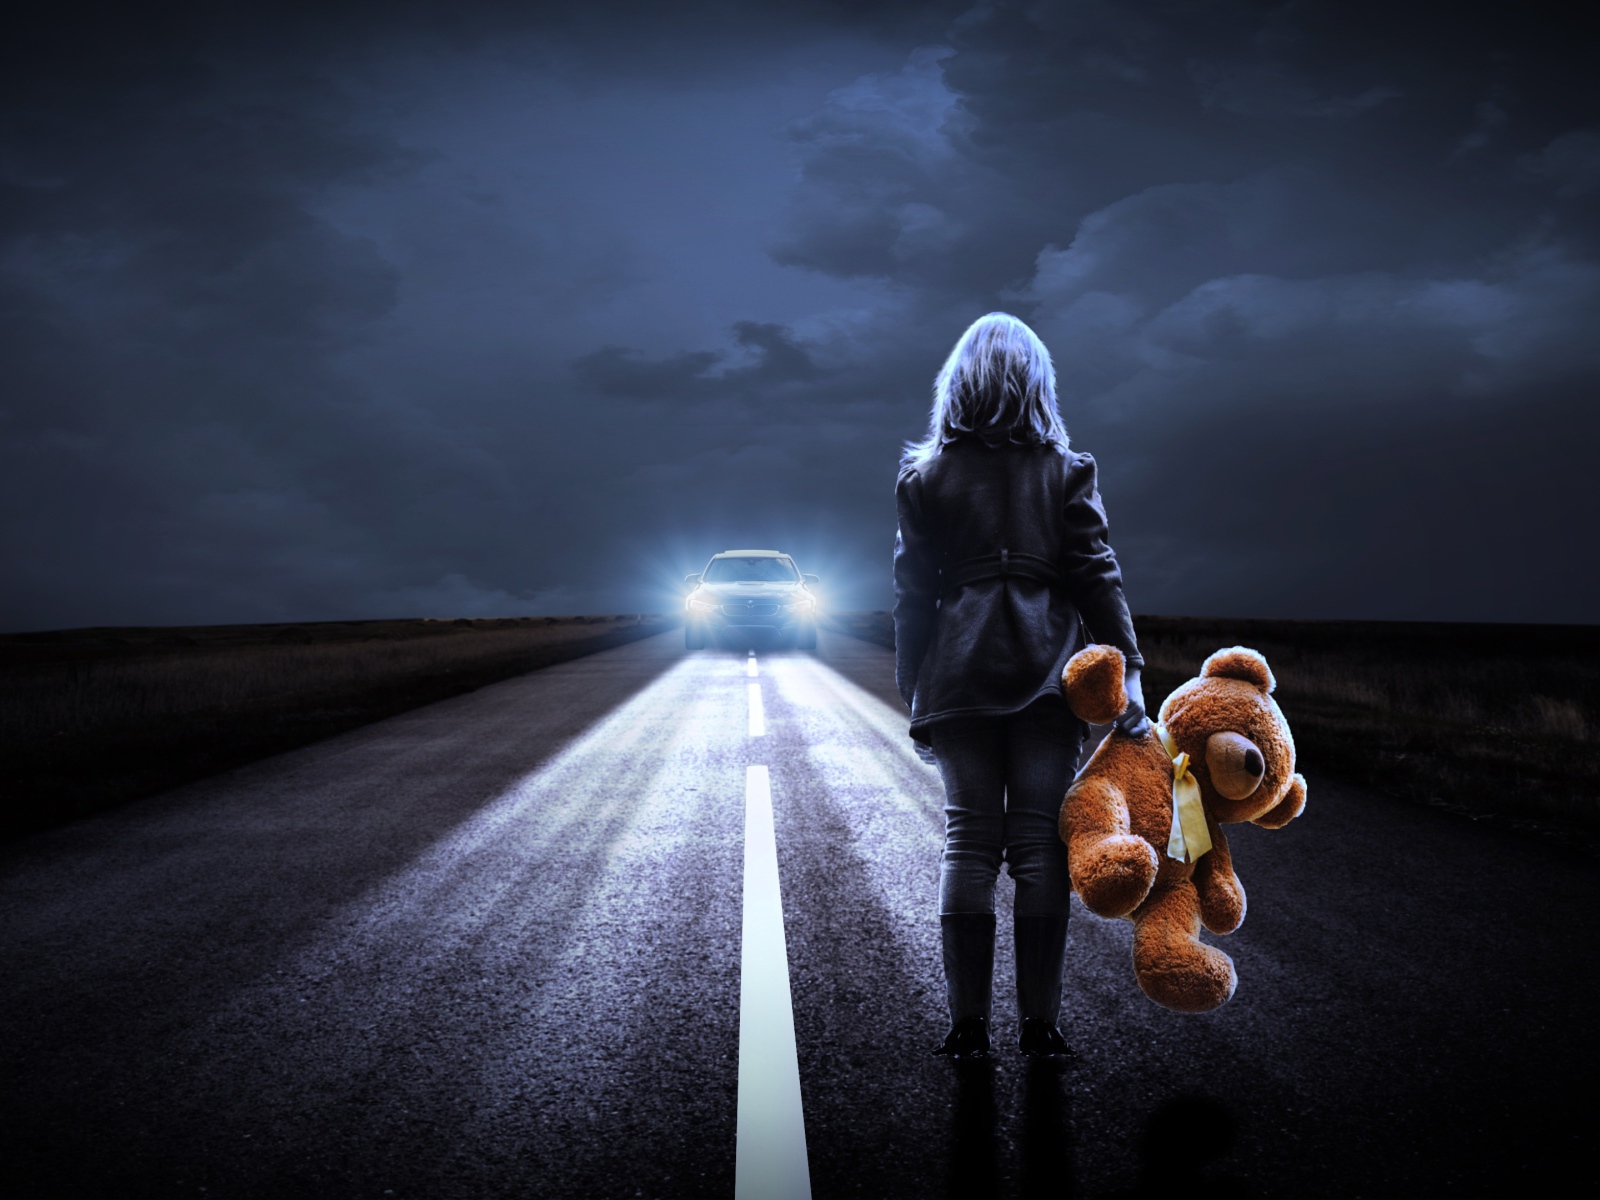 Girl stands on the road with a toy bear